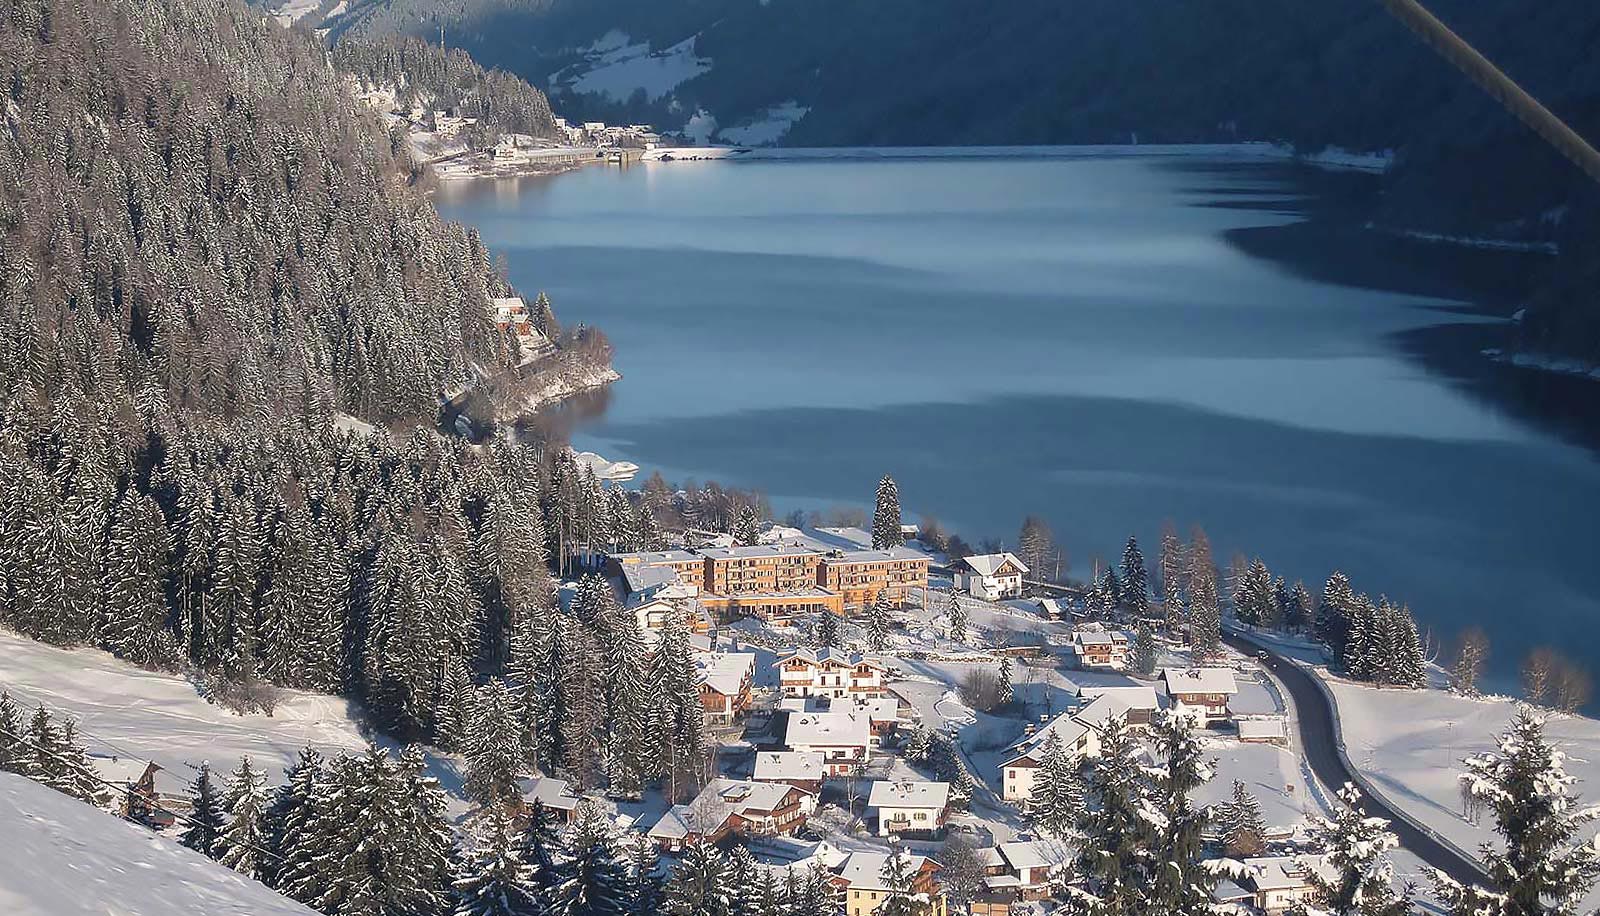 Snowy Arosea Hotel in Ultental-Val d'Ultimo on the banks of Zoggler Stausee-Lago di Zoccolo